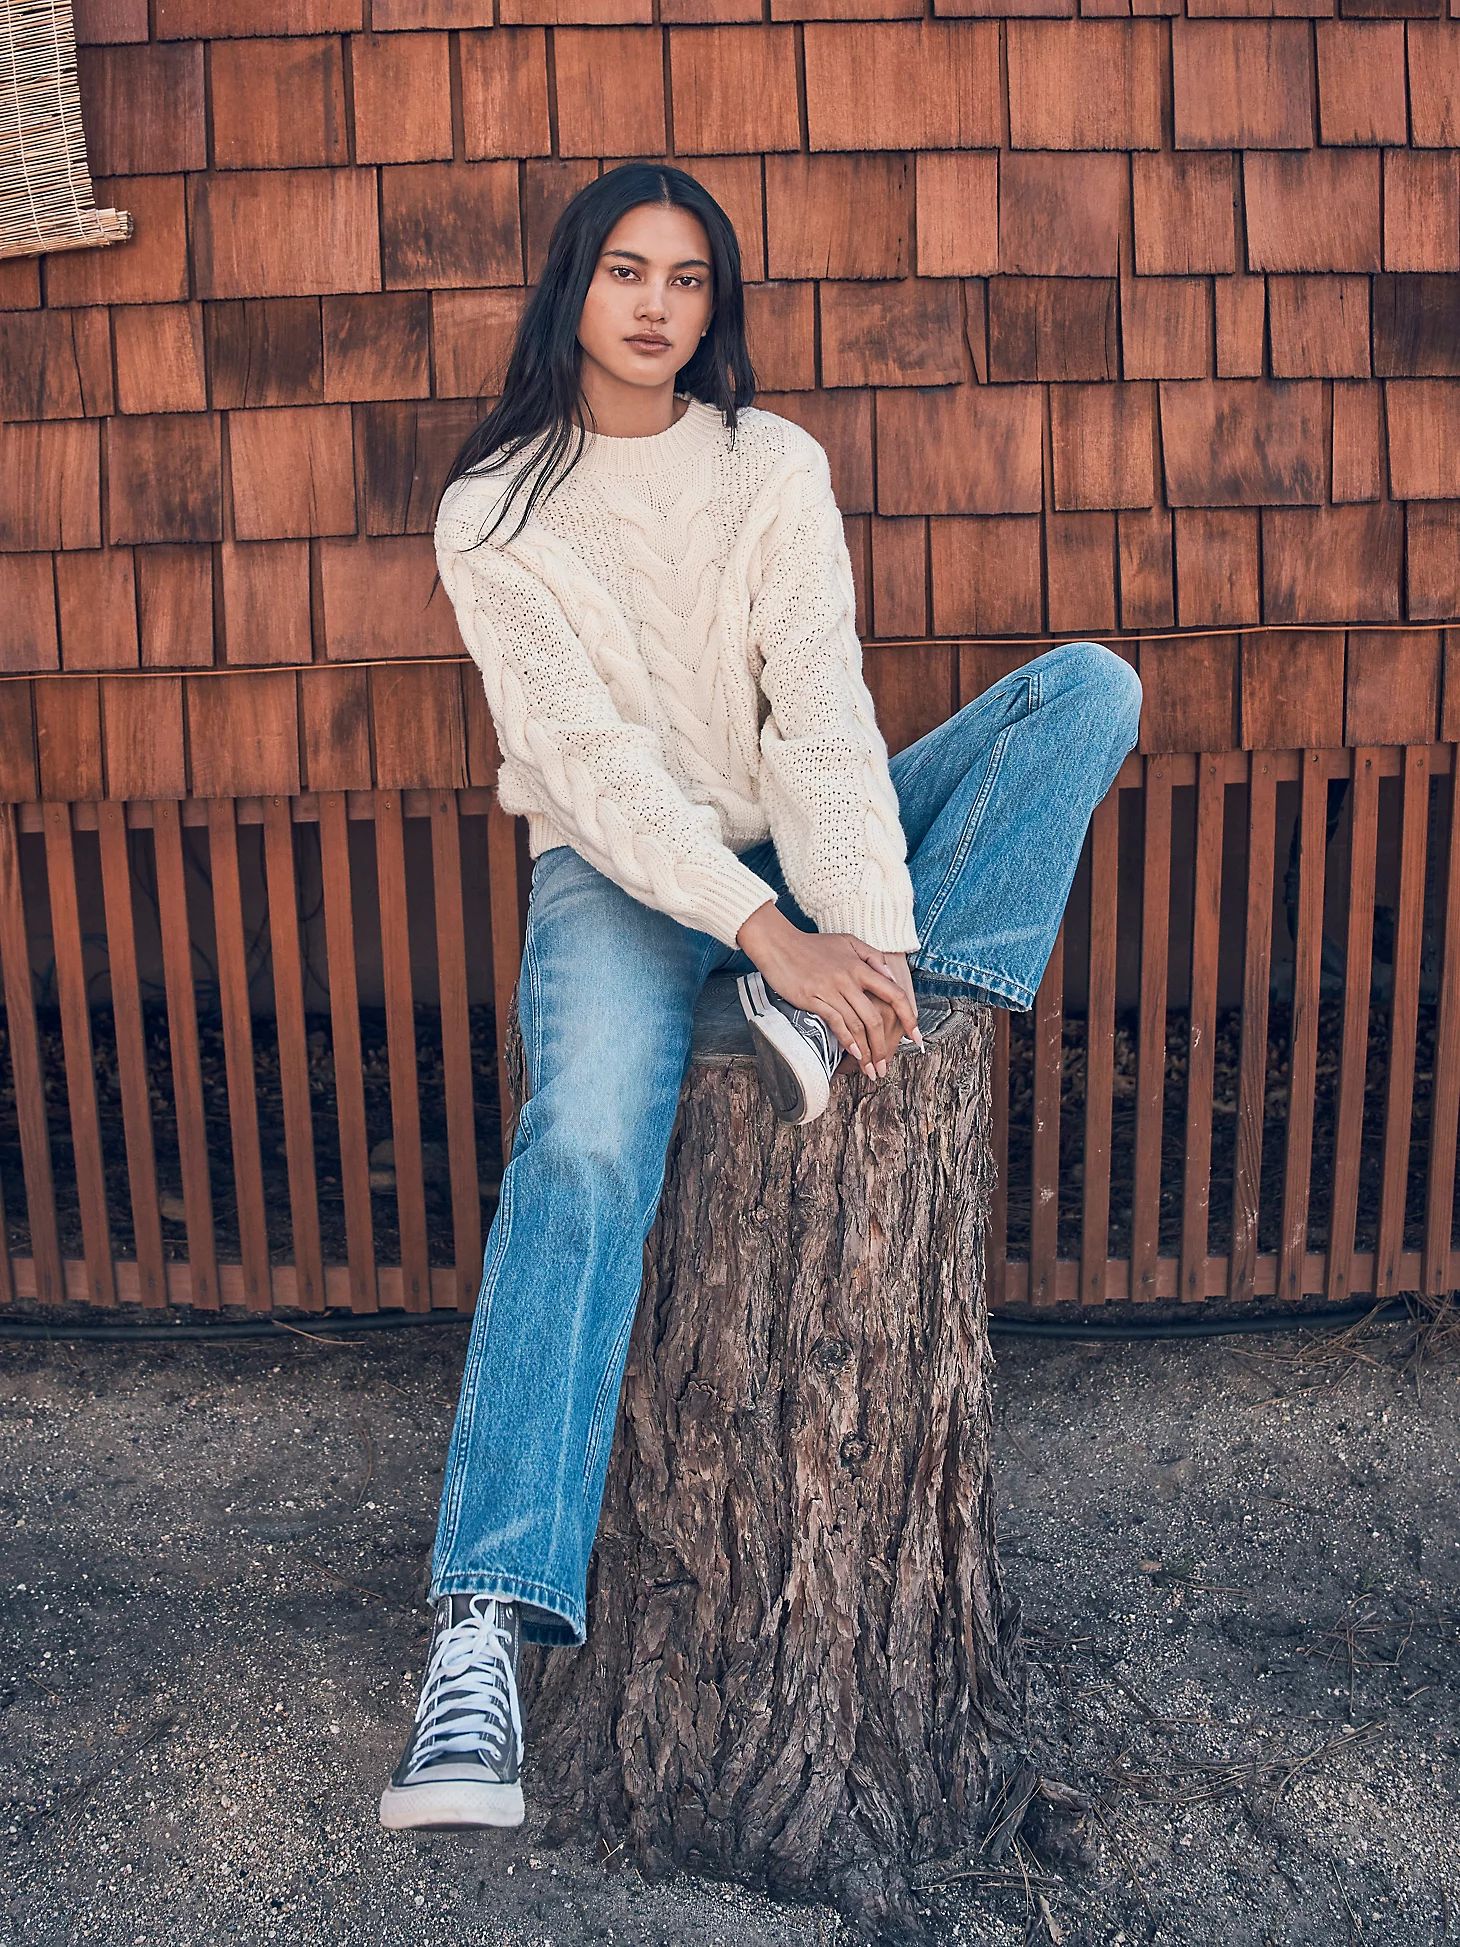 Women's Cable Knit Sweater in Worn White | Wrangler